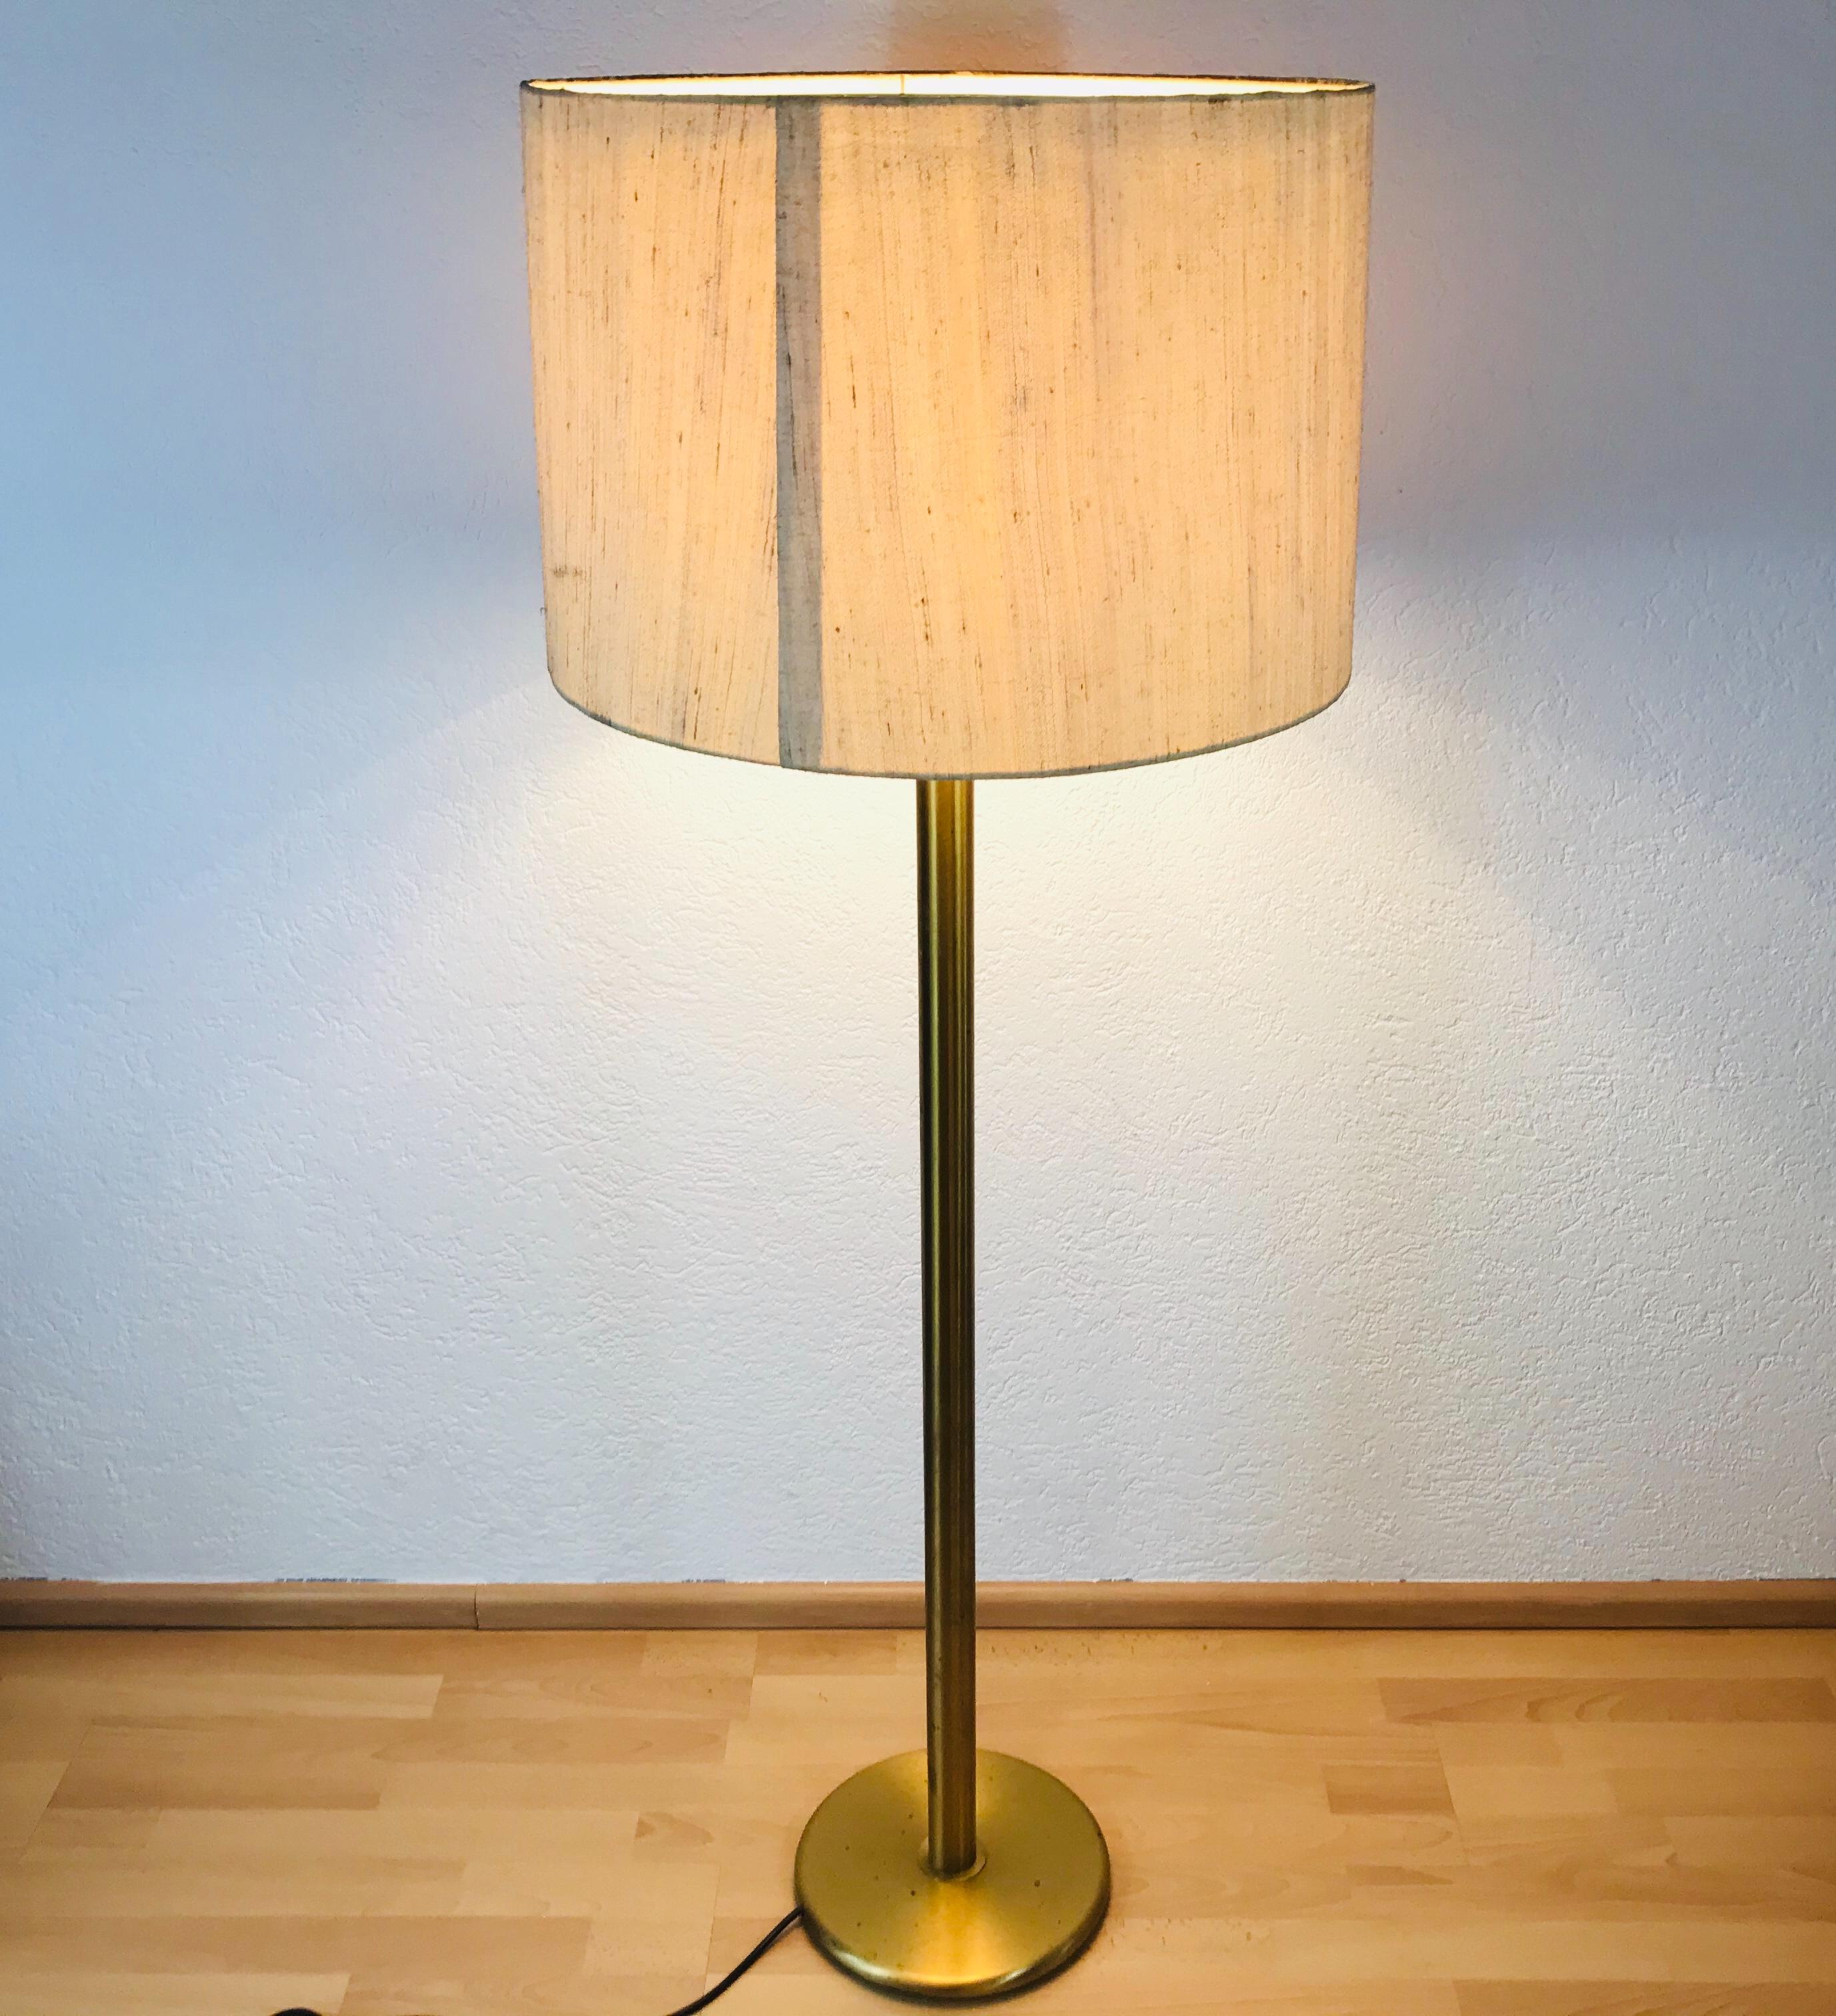 A midcentury floor lamp by Cosack made in Germany in the 1960s. It is fascinating with its midcentury design and cloth shade. The bottom of the light and the bar are made of full brass there are three E27 sockets on the bar and one E27 socket on the